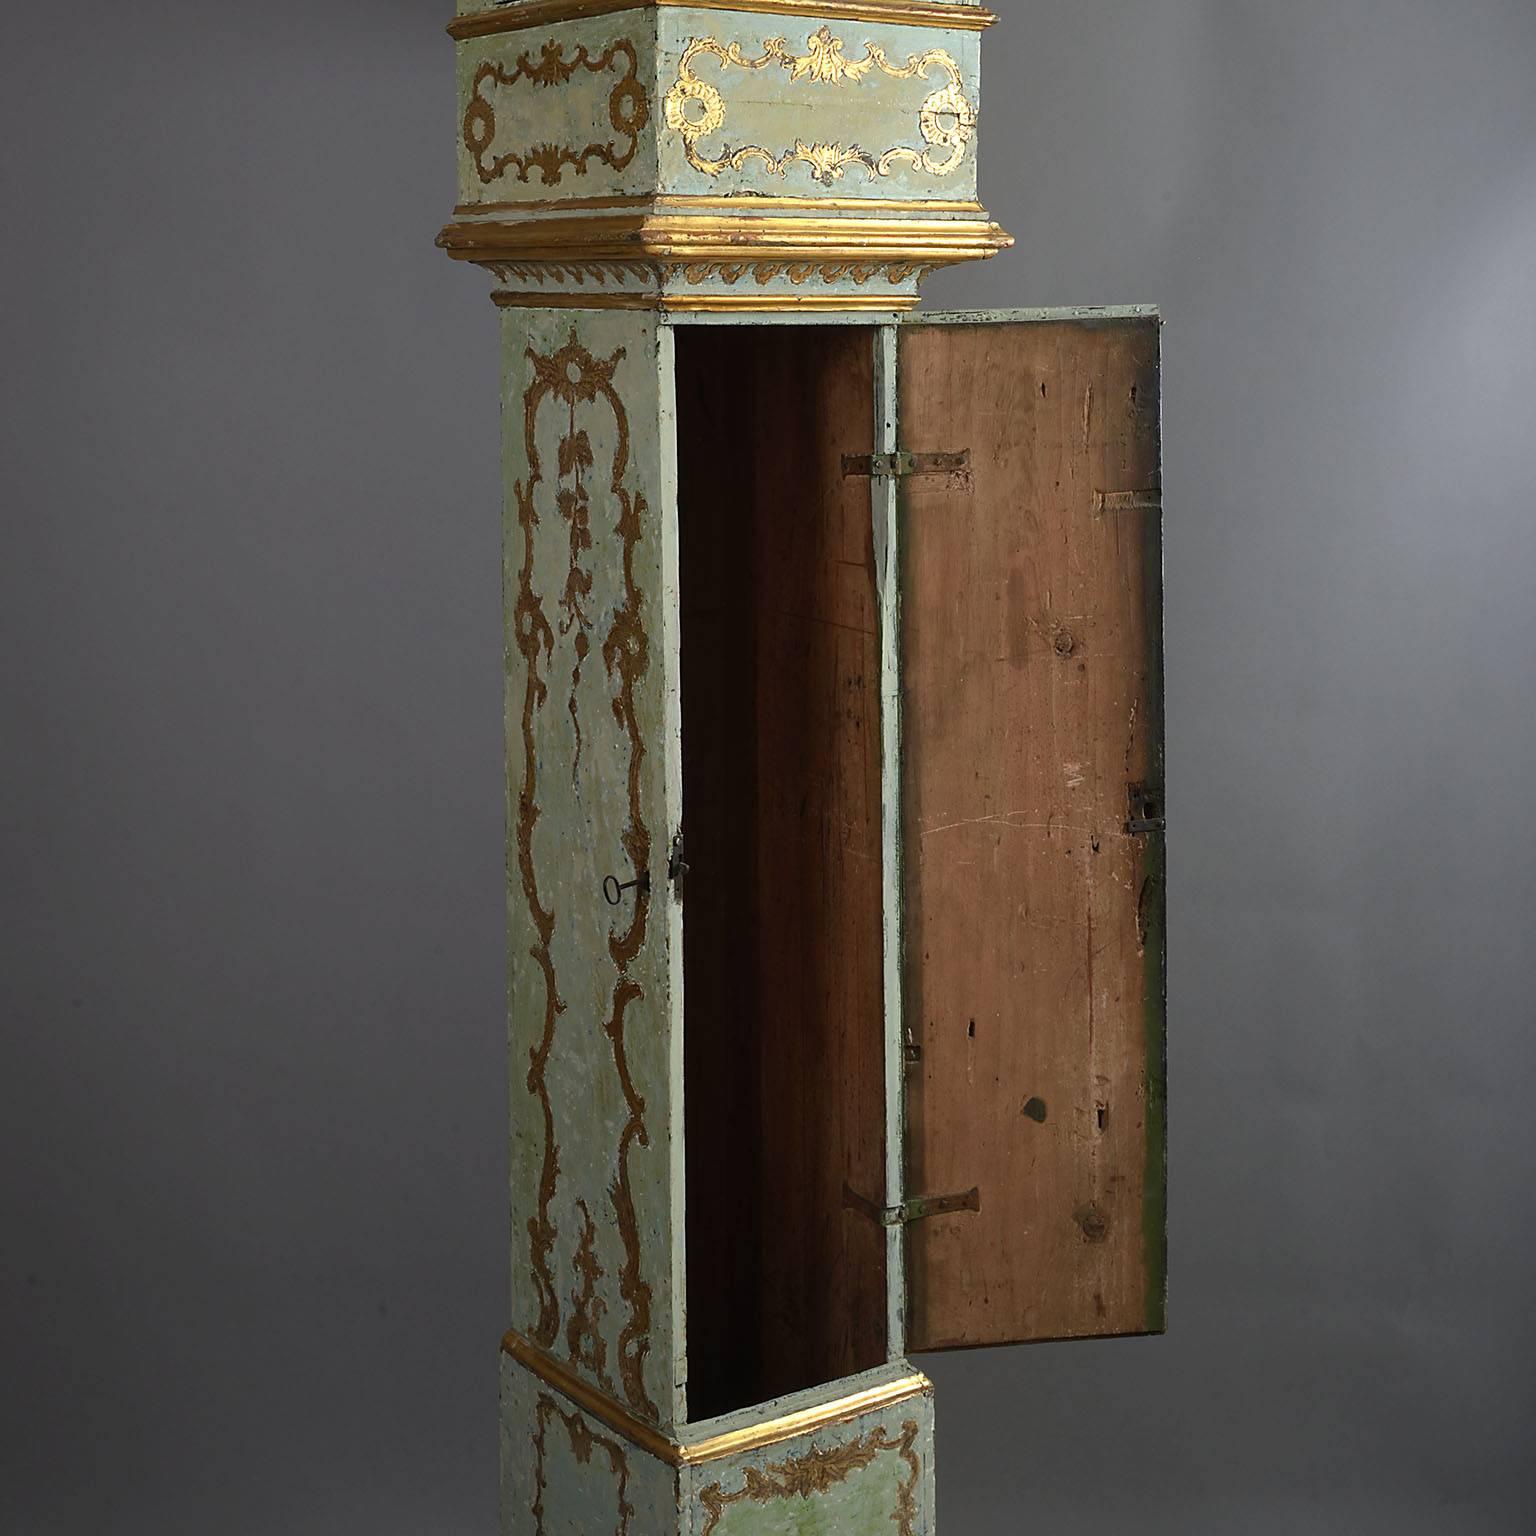 A rare Italian mid-18th century painted and parcel-gilt longcase clock of grand scale
The tall case decorated with carved and gilt Rococo scrollwork on an eau de nil ground. The glazed pyramidal top above the fully glazed hood with three doors